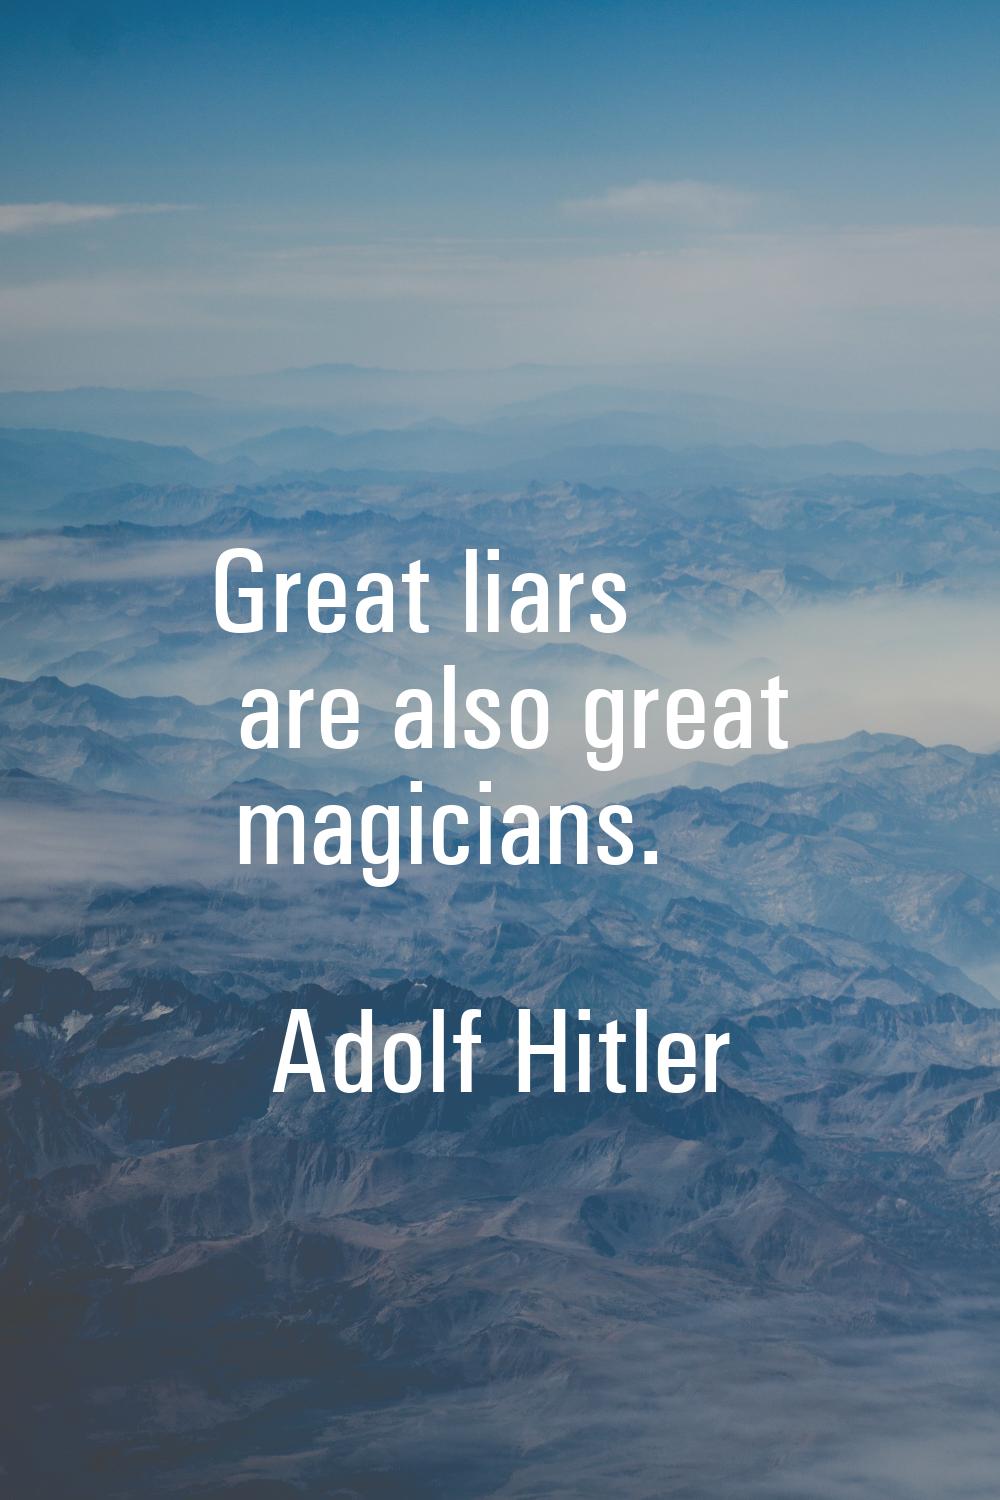 Great liars are also great magicians.